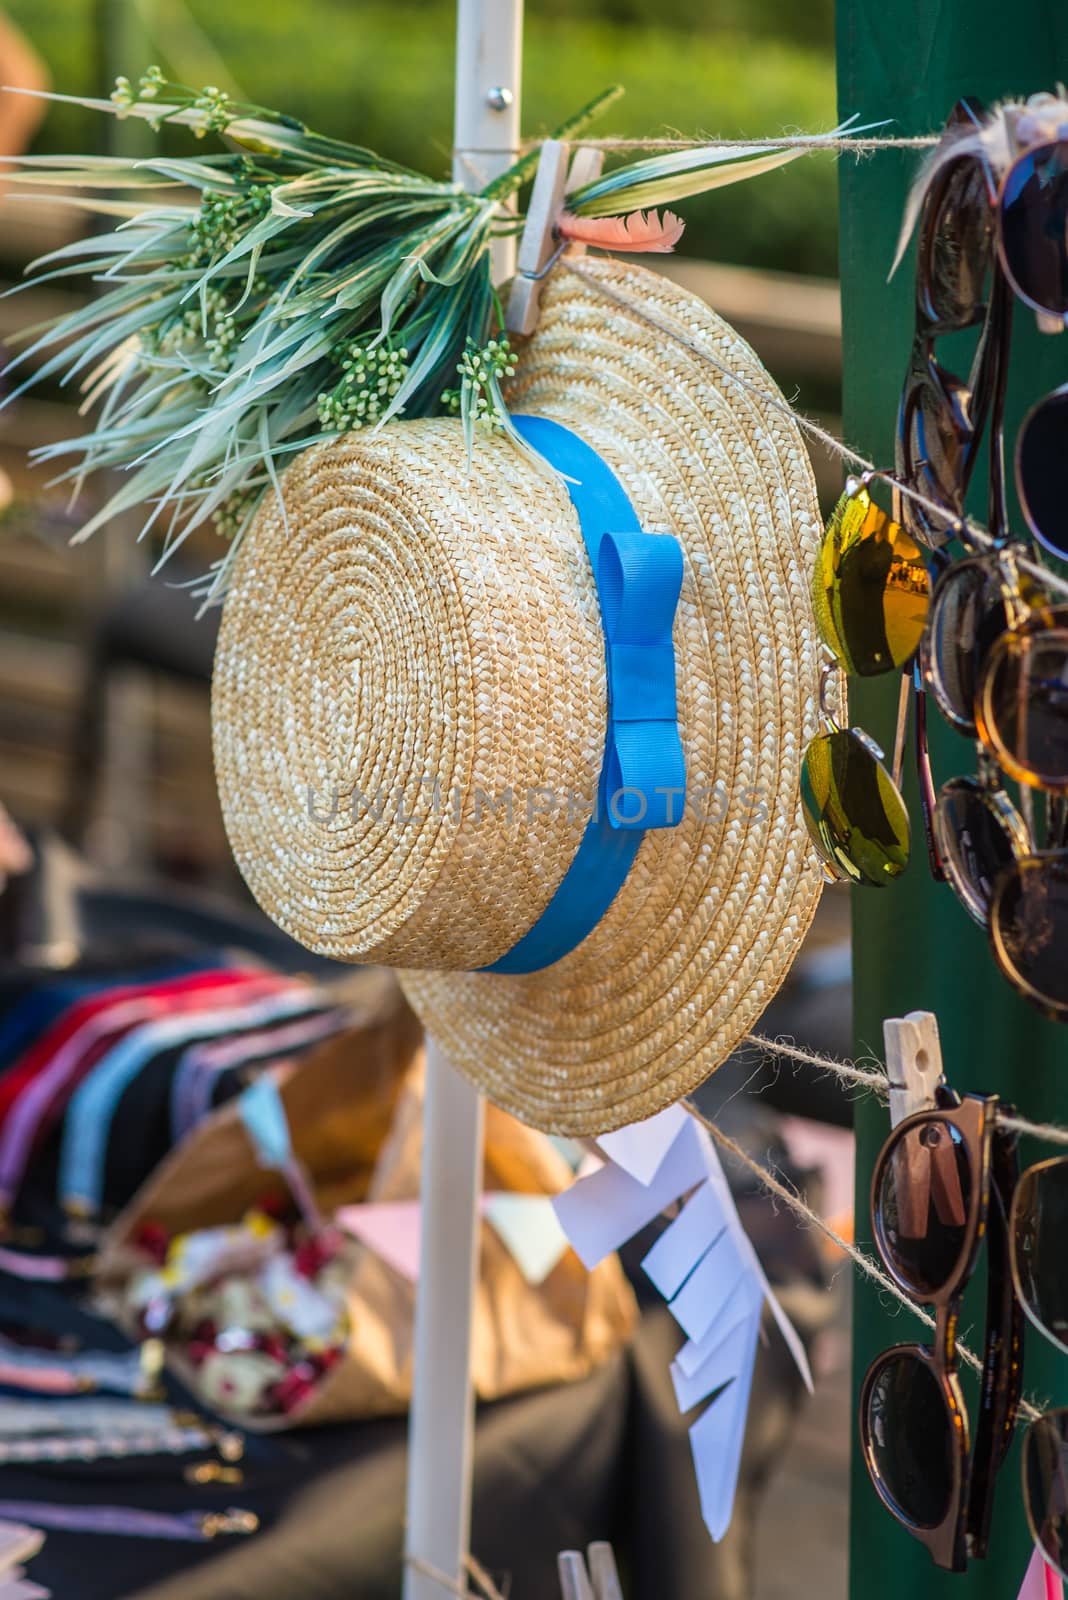 Straw hat with a blue ribbon at the fair